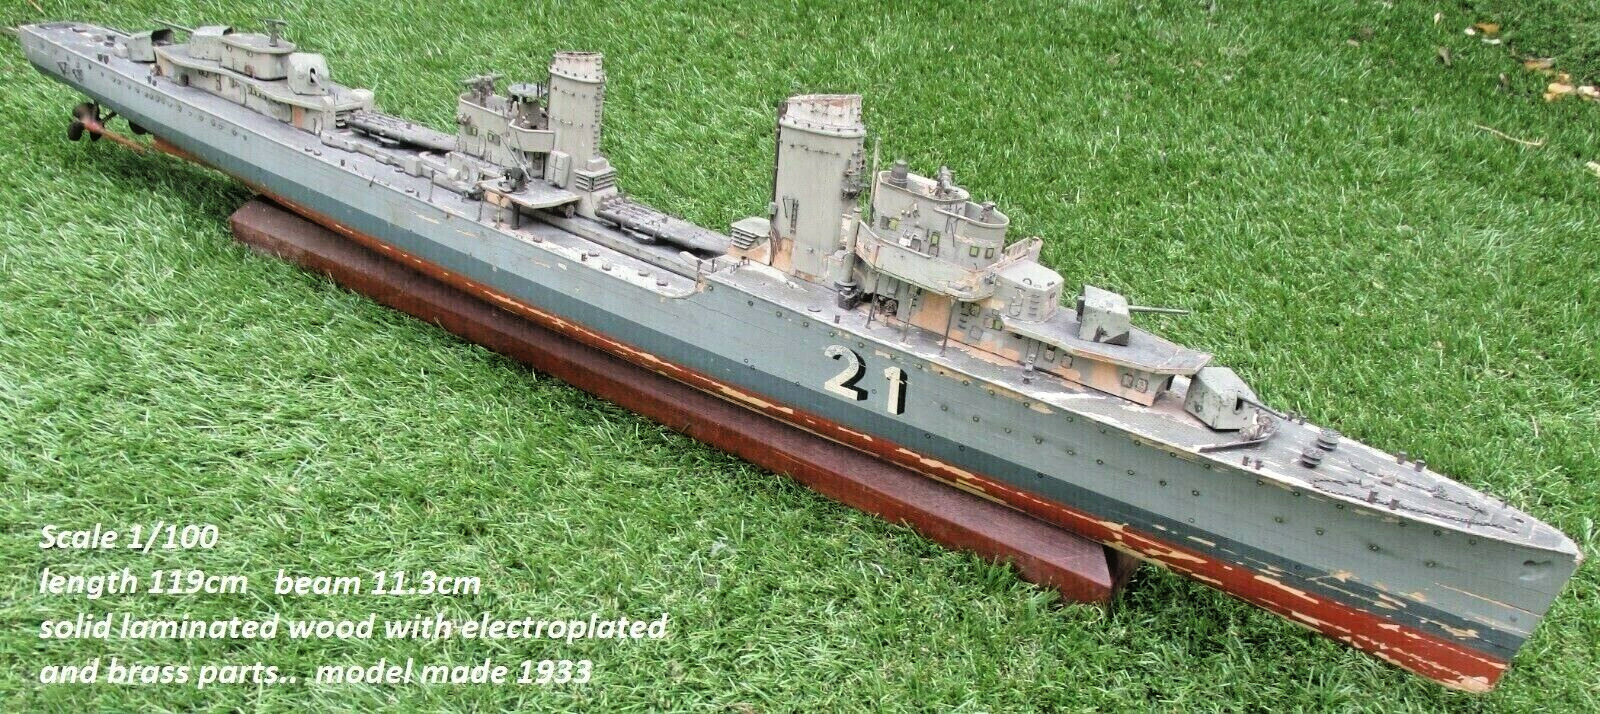 The ONLY 1933 Concept & Builder's model of all 21 of Germany's WW2 Destroyers, 